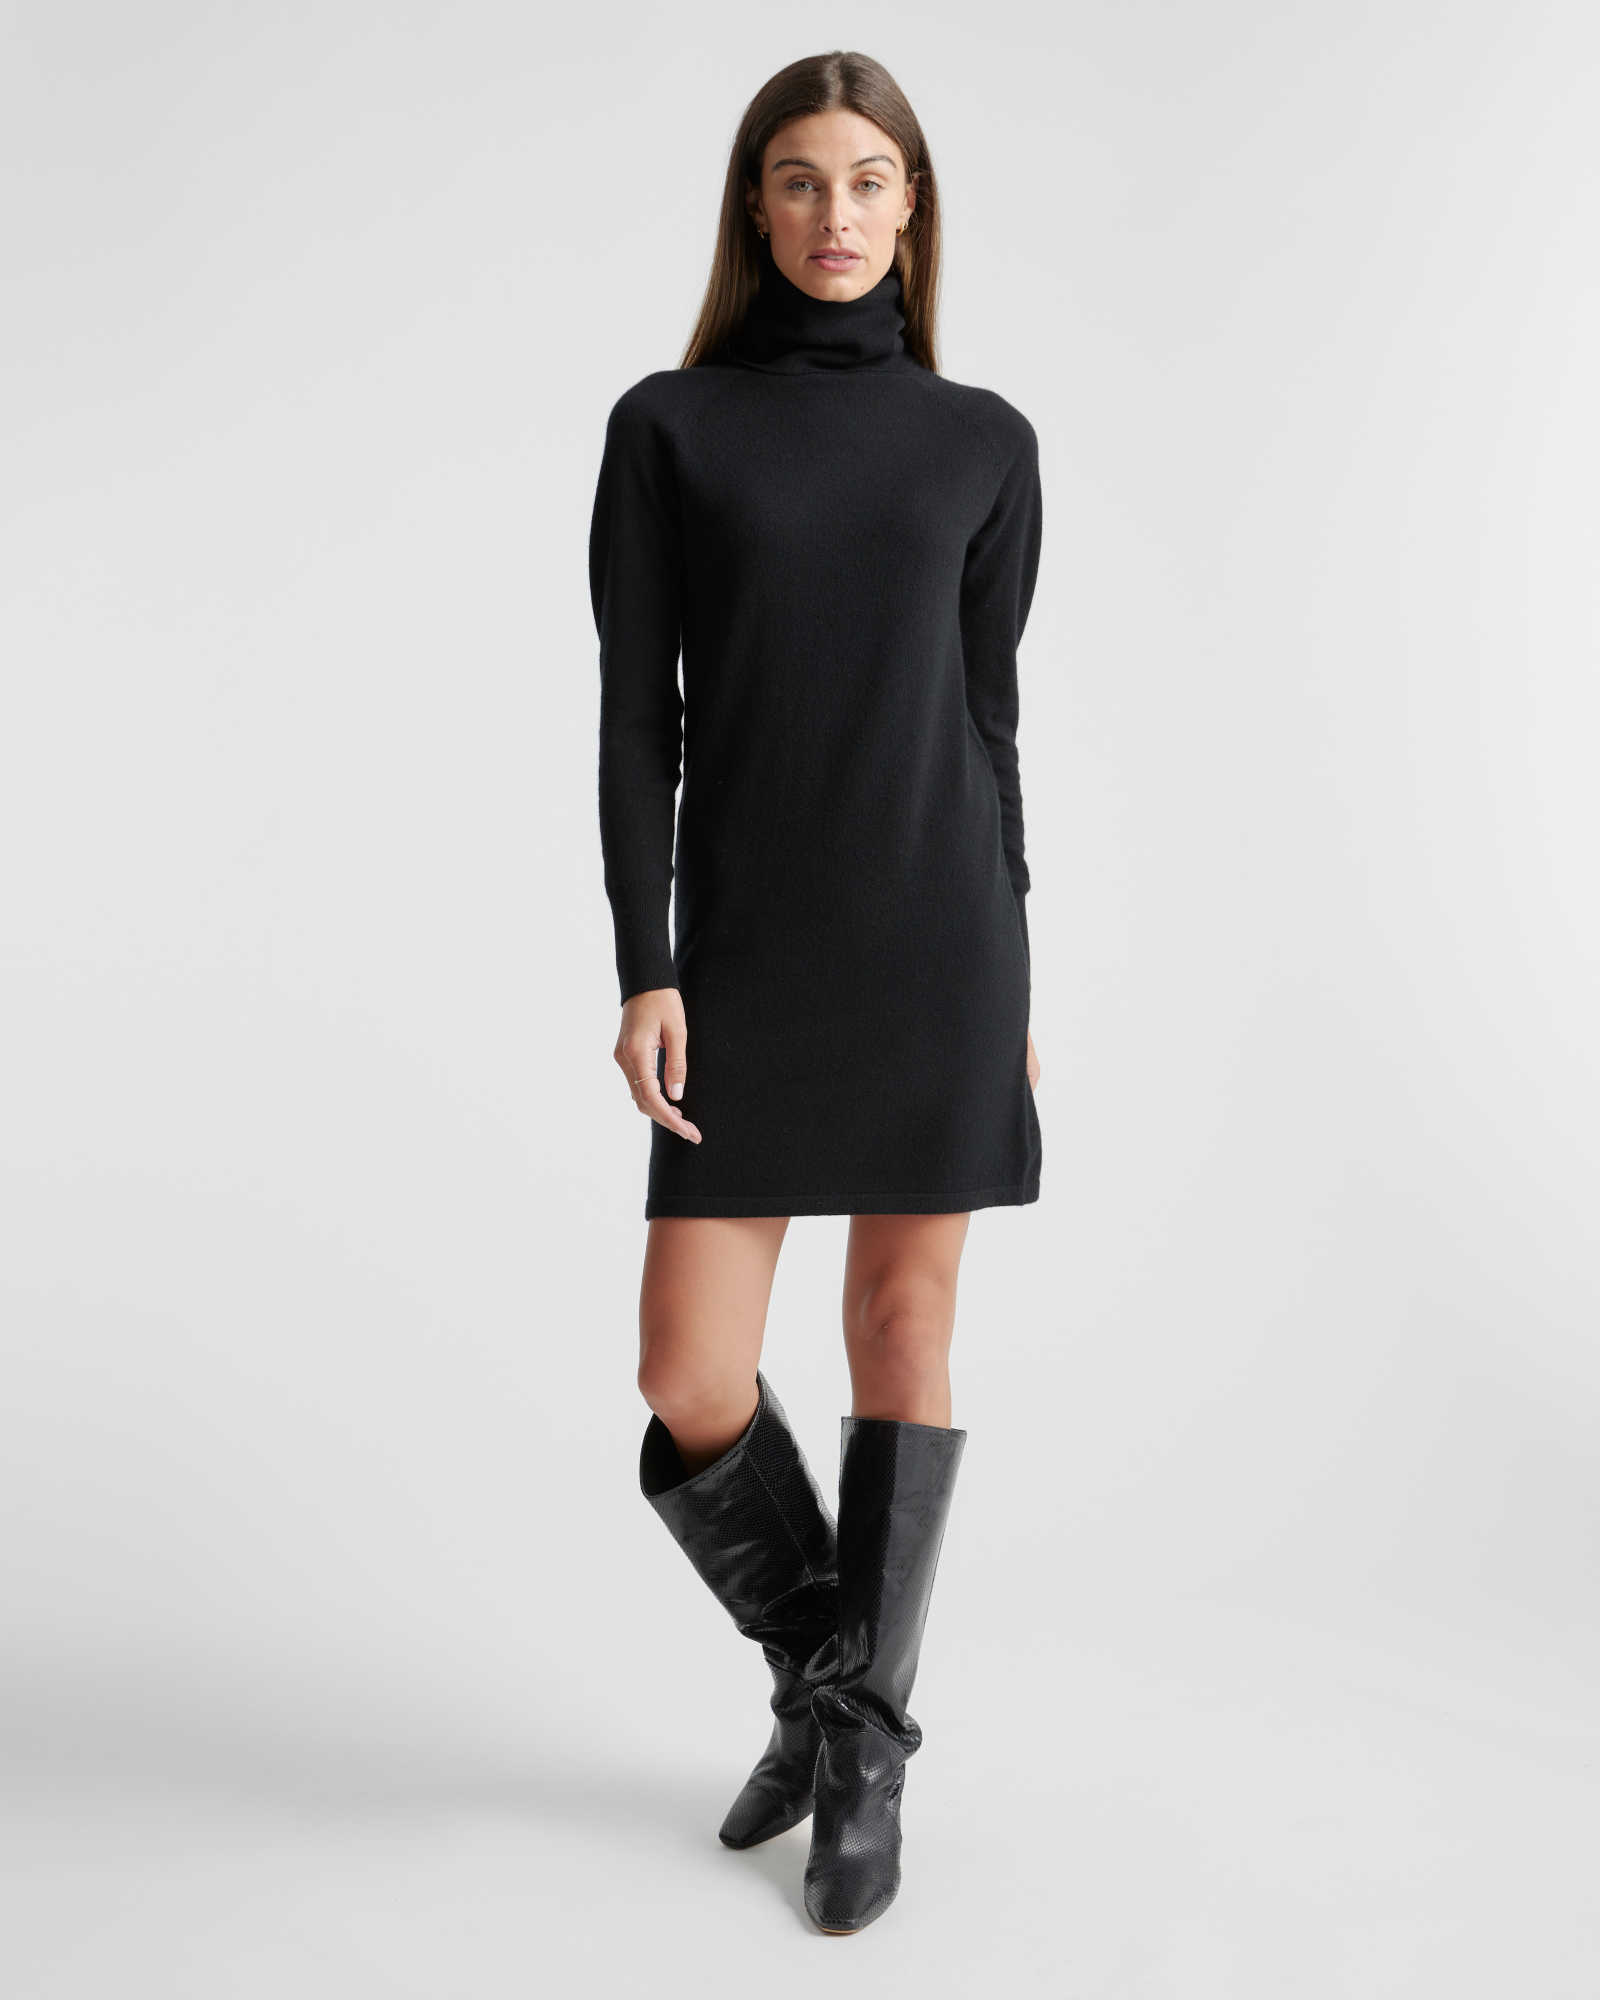 Women's Cashmere Clothing, Sweaters & More | Quince